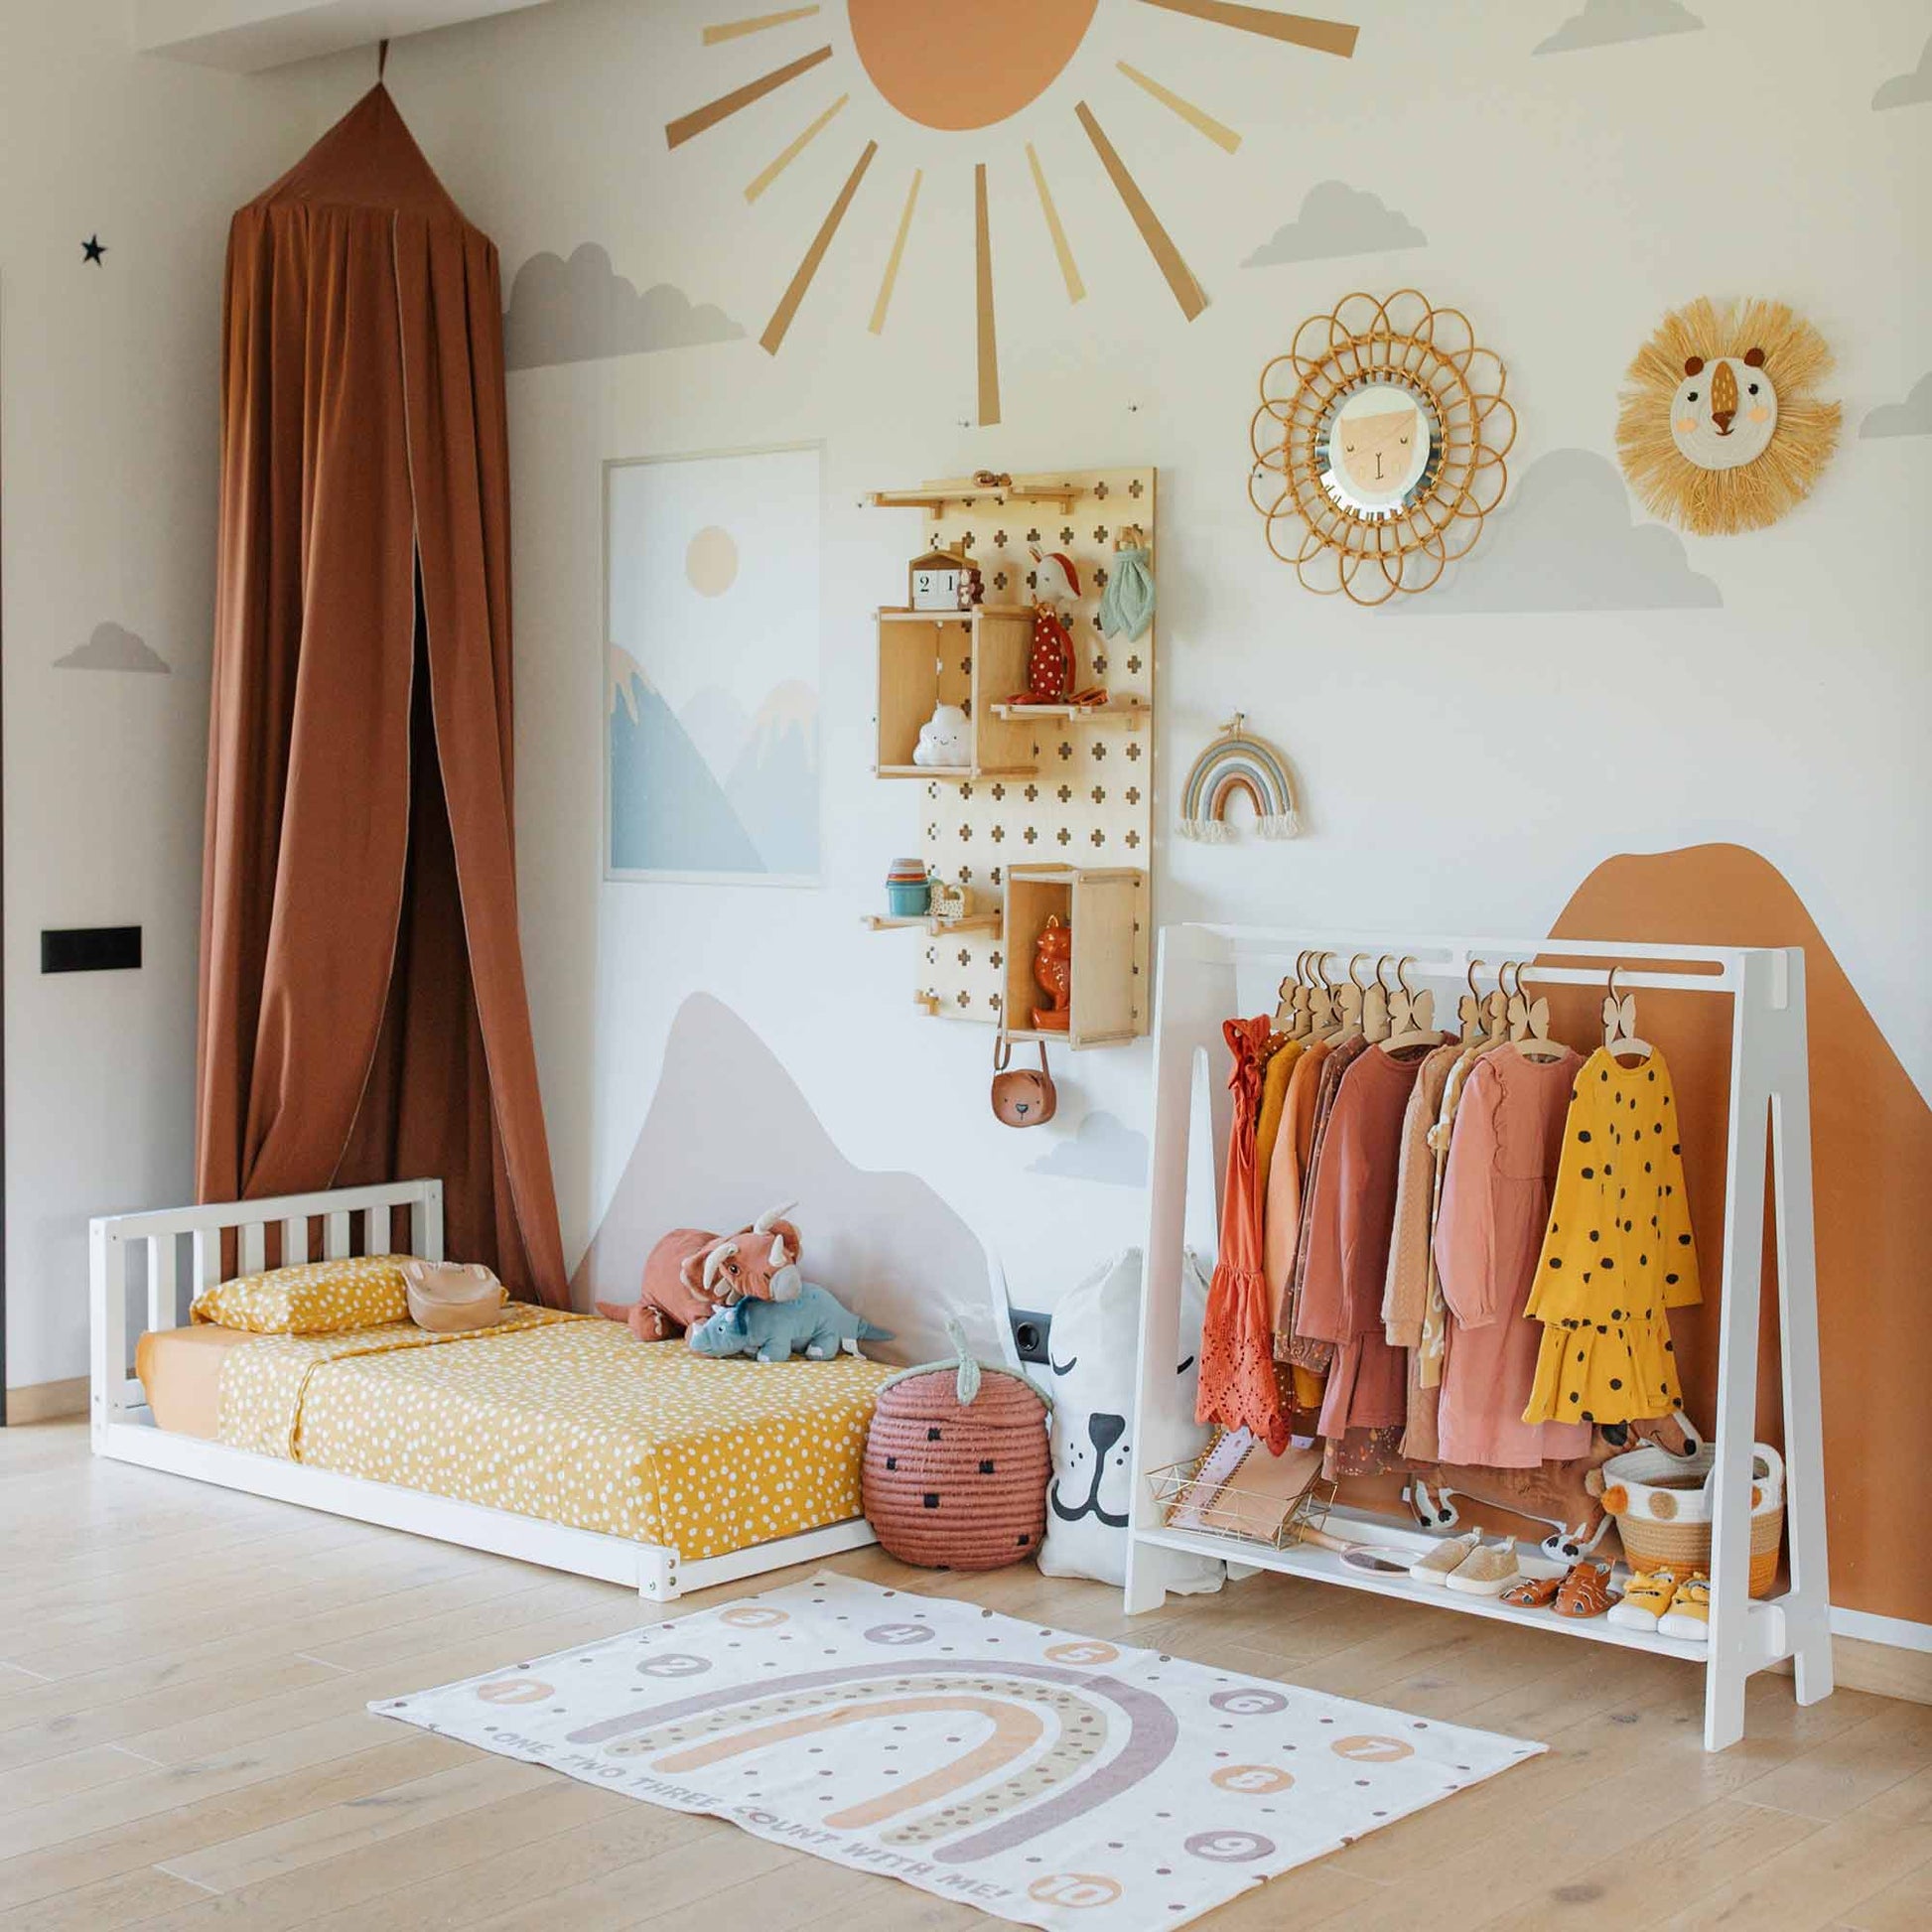 A children's room showcasing a low bed, a play rug, the Kids' clothing rack brimming with colorful outfits, a mural on the wall, and various decorations. The overall theme features warm tones and nature-inspired designs.